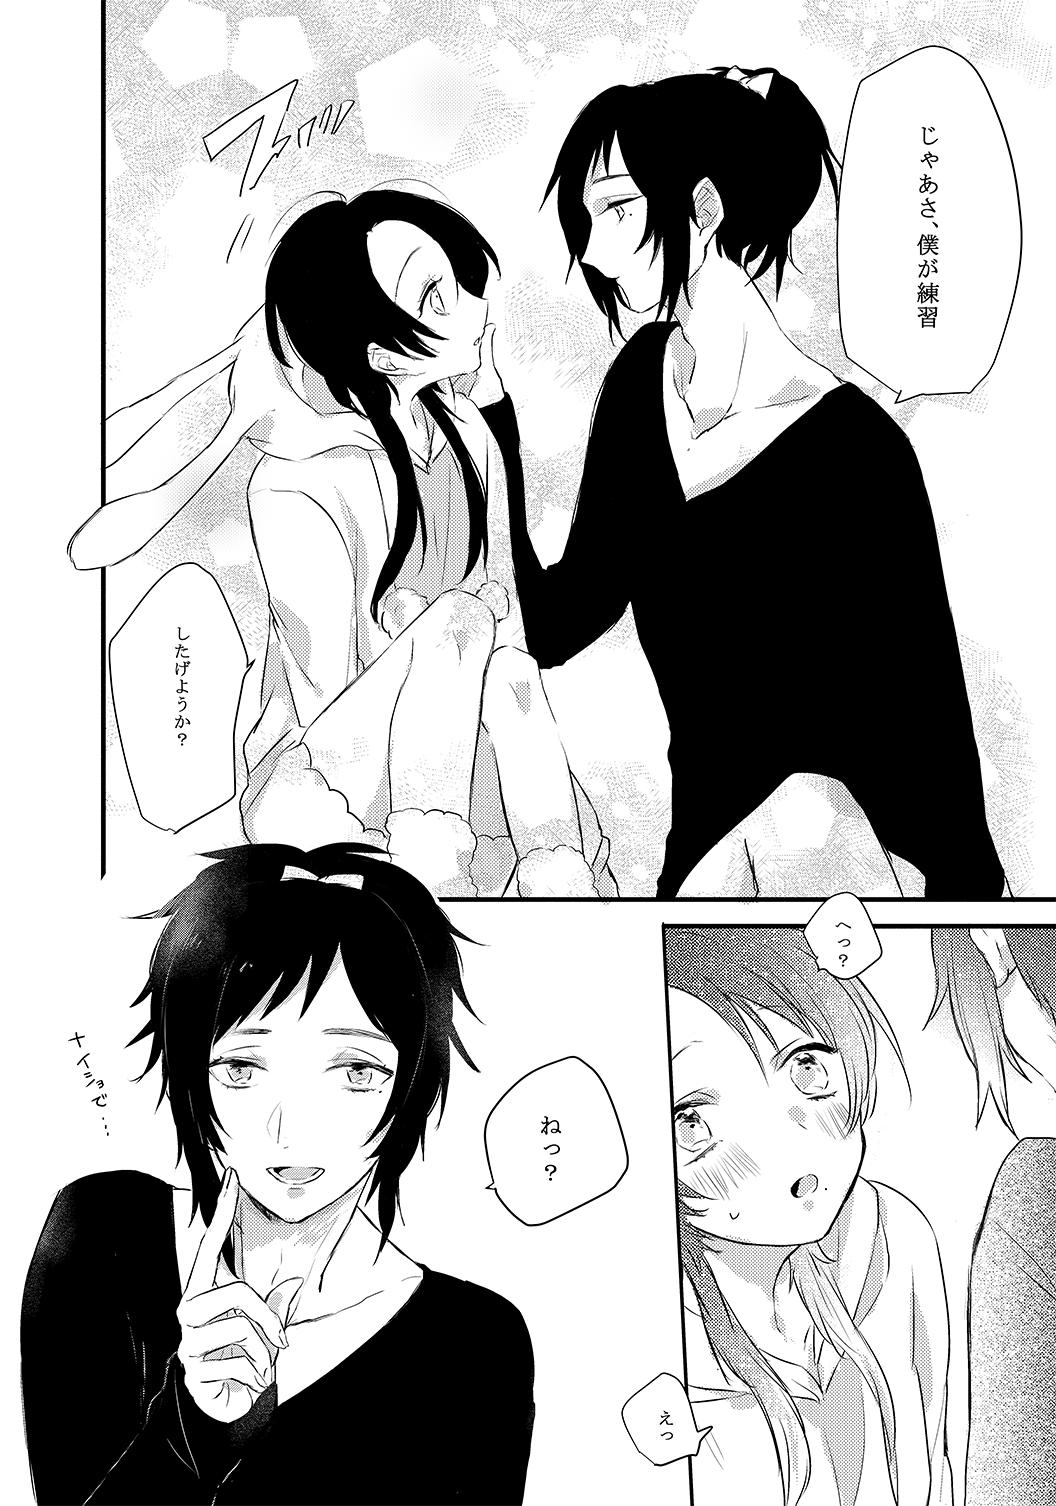 Gorda BROTHER COMPLEX + SISTER COMPLEX - Touken ranbu Gay Pawnshop - Page 10